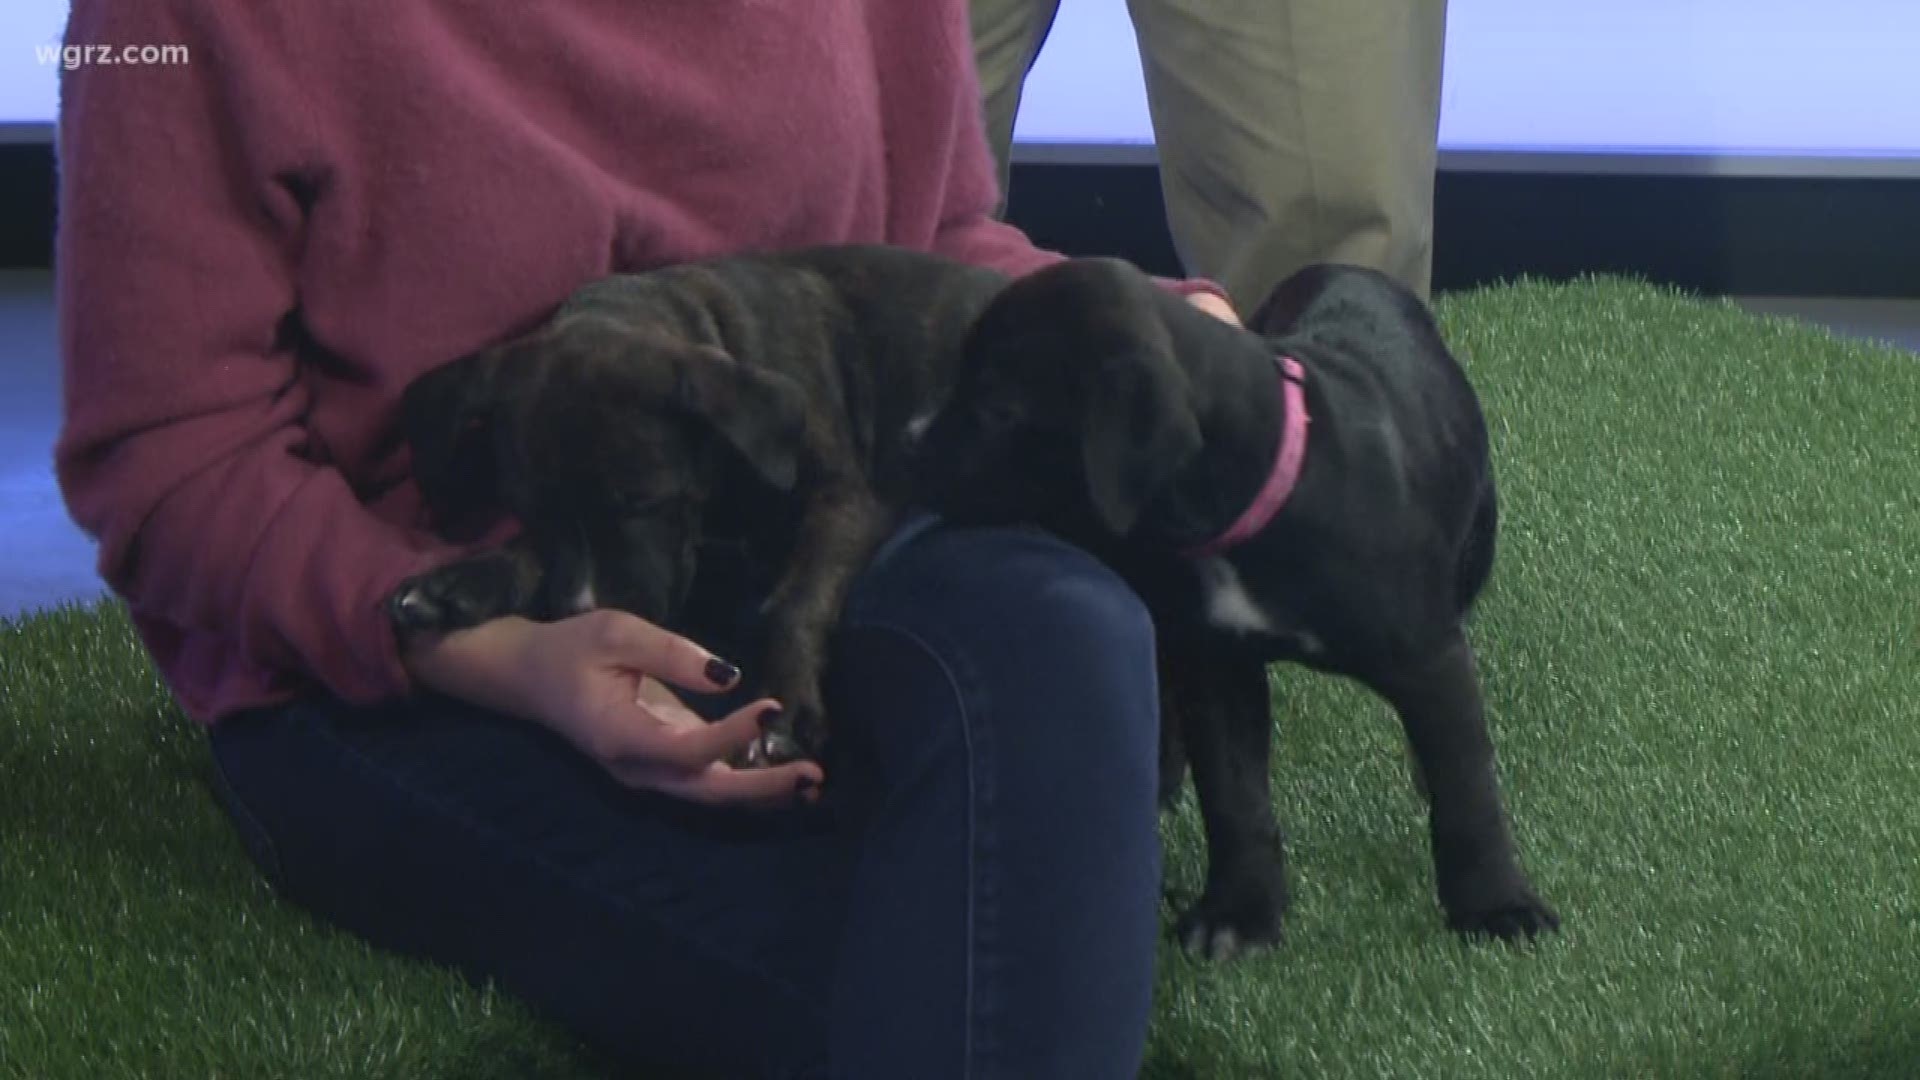 Introducing Meredith and Olivia! These sweet puppies couldn't get enough cuddles on Daybreak - and they need forever homes!